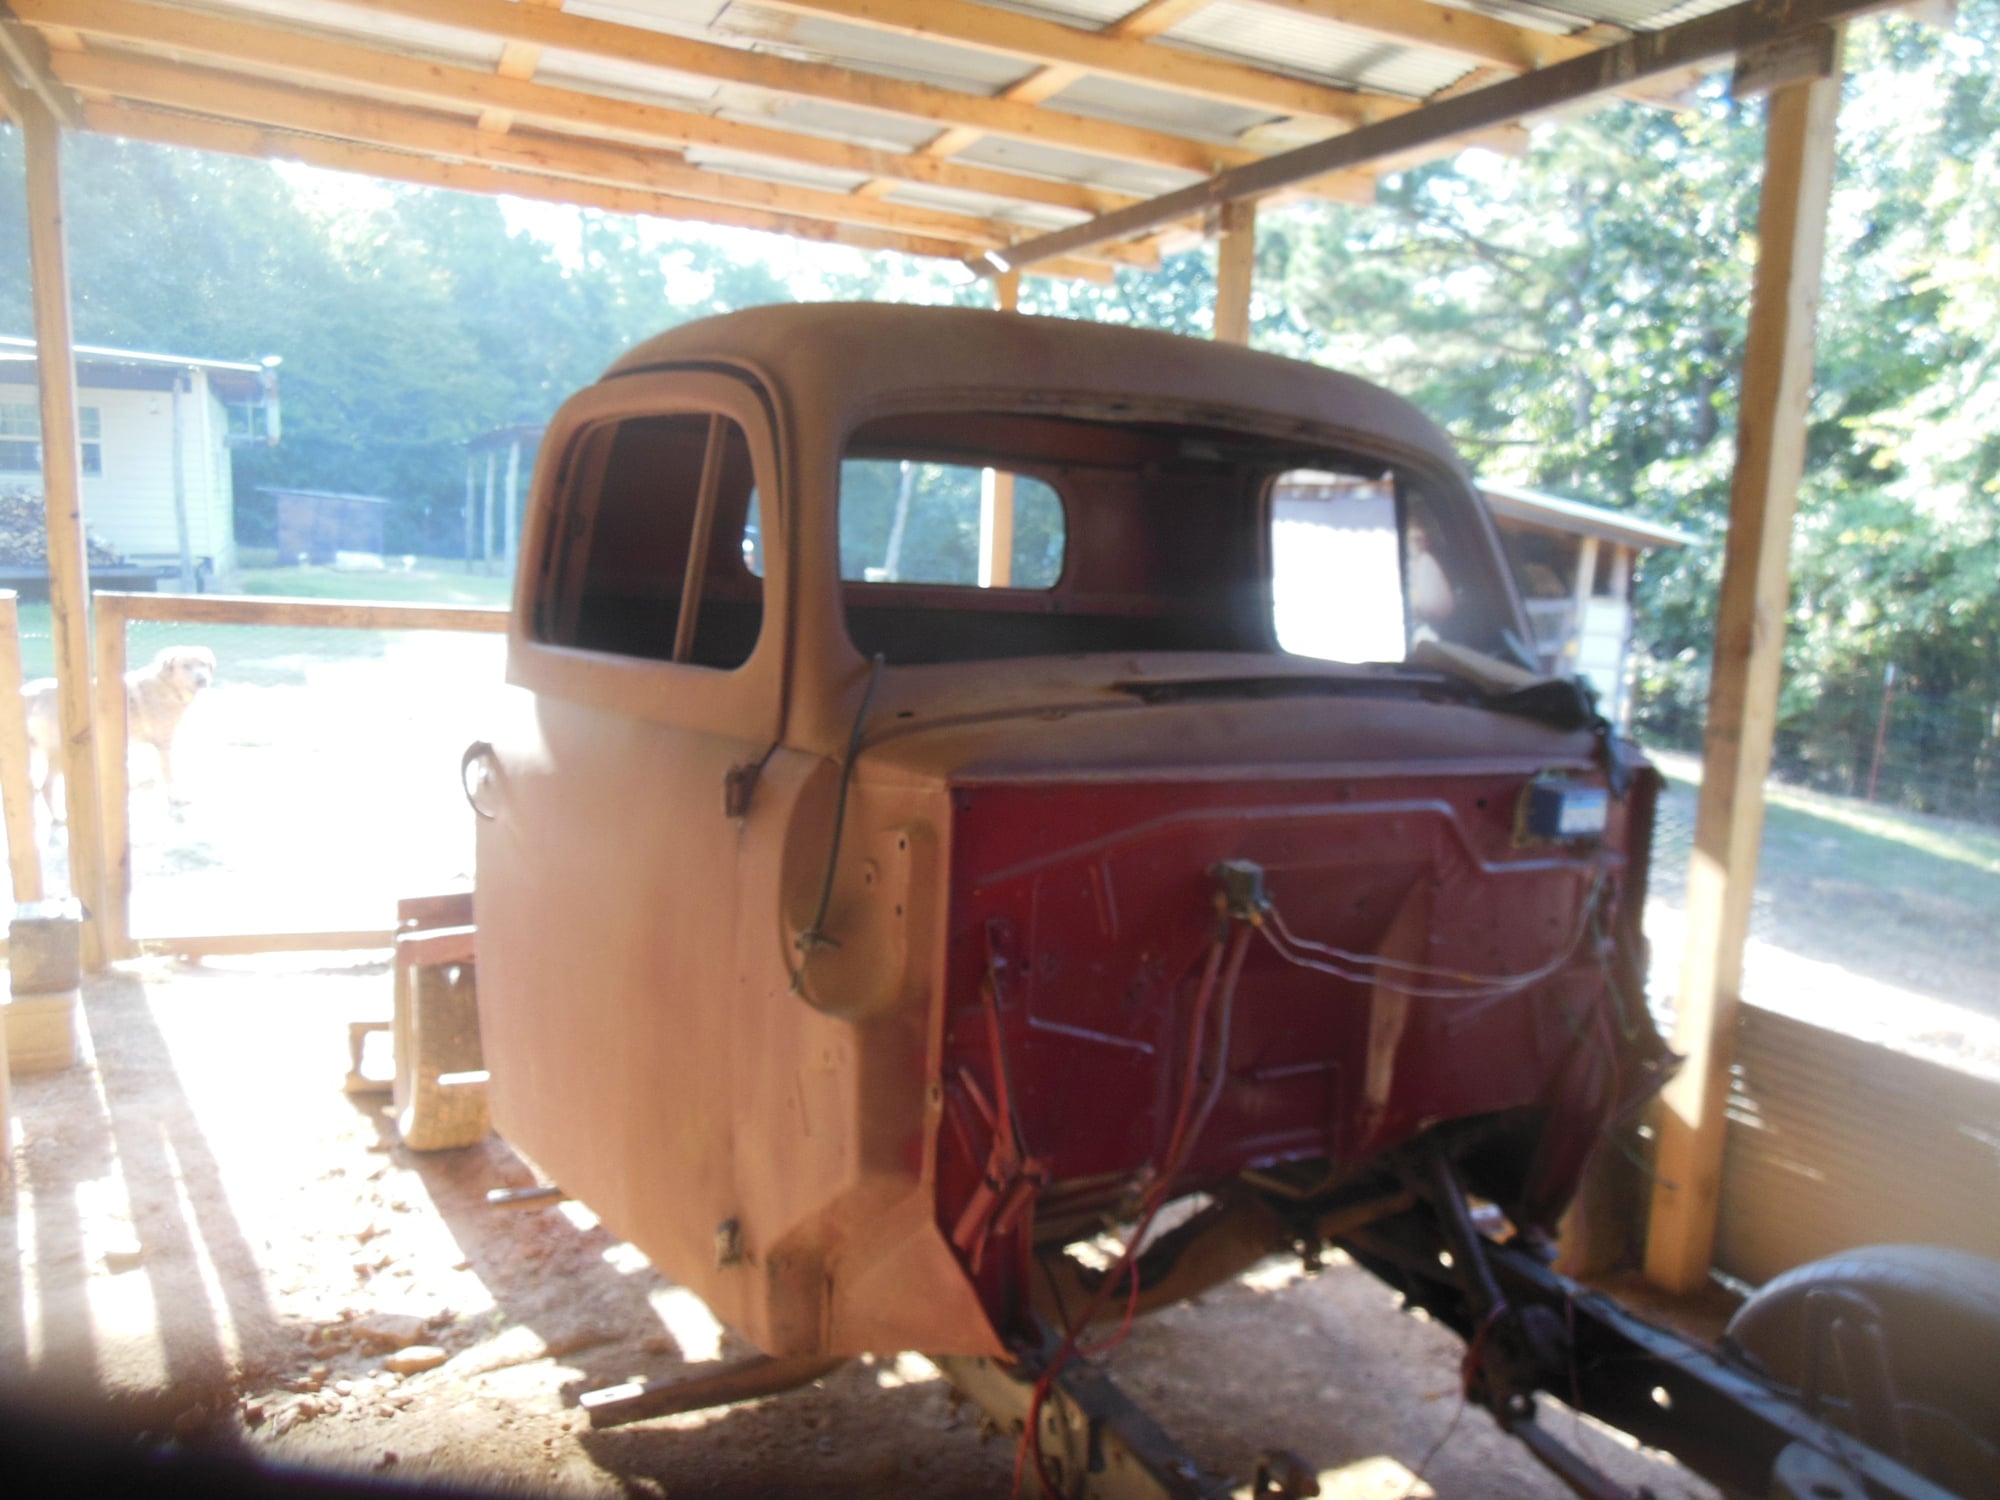 1950 Ford F1 - 1950 F-1 for sale - Used - VIN 97HC180741 - Other - 2WD - Manual - Truck - Brown - Booneville, AR 72927, United States